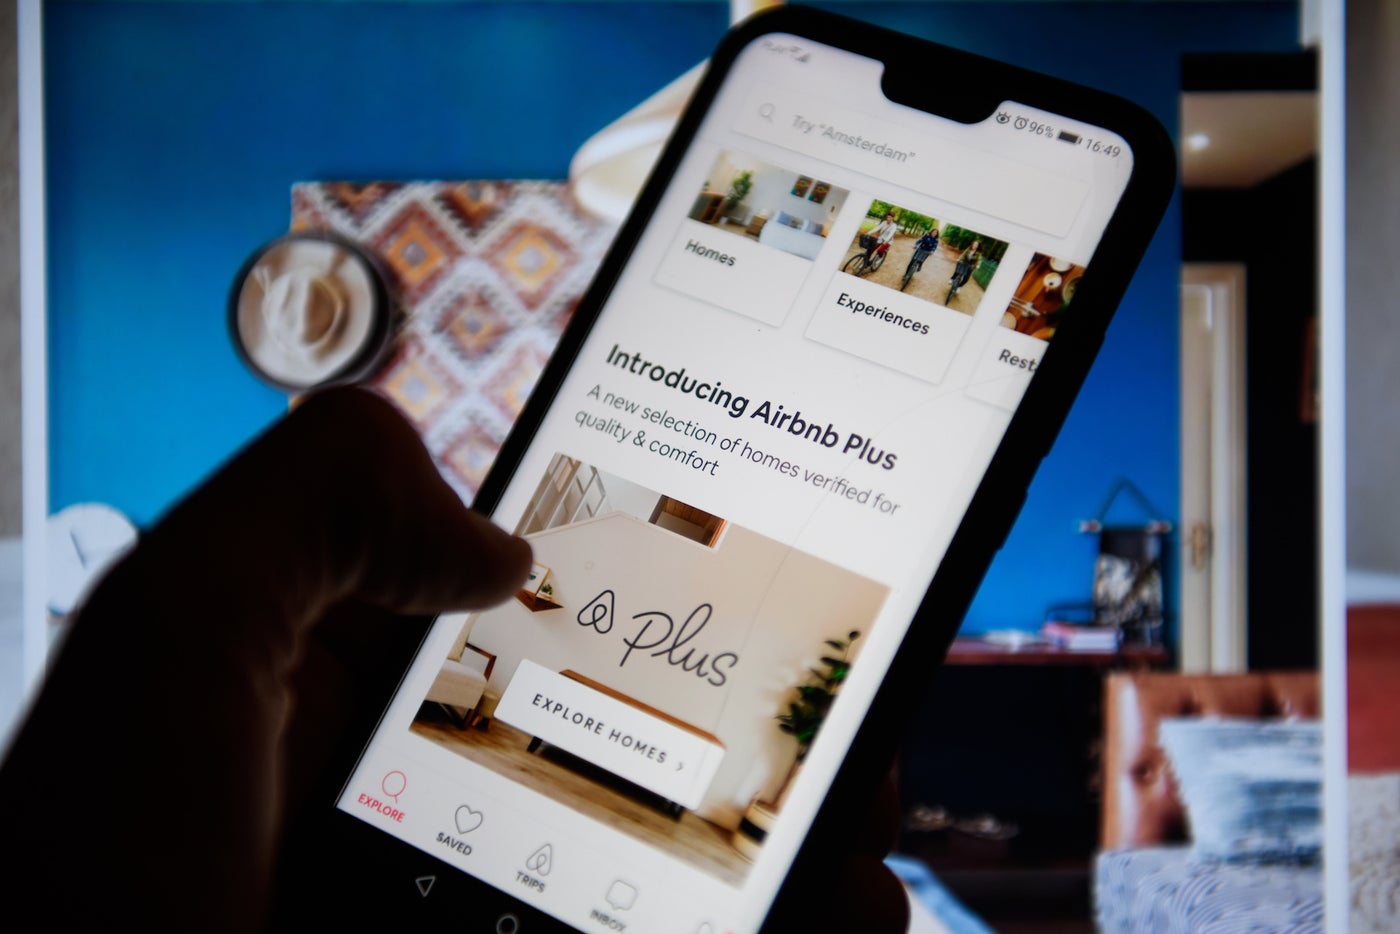 How new Airbnb restrictions could impact travelers